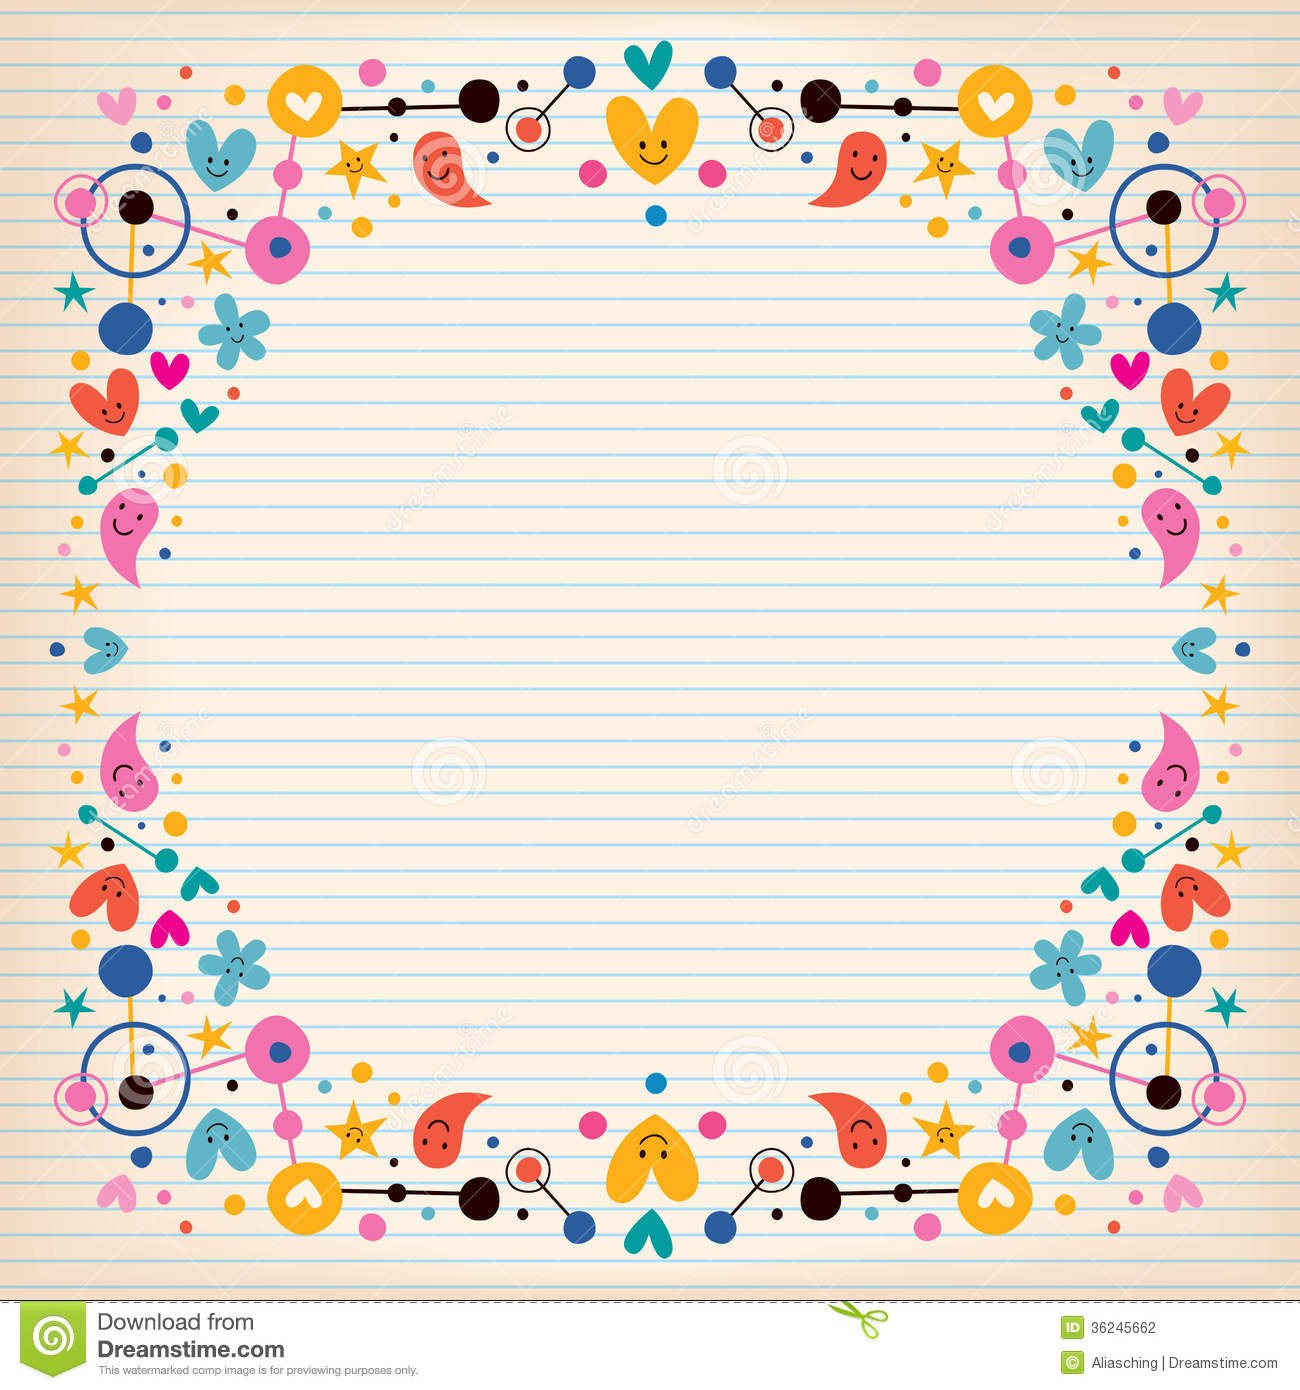 Flowers and Stars Clip Art Borders